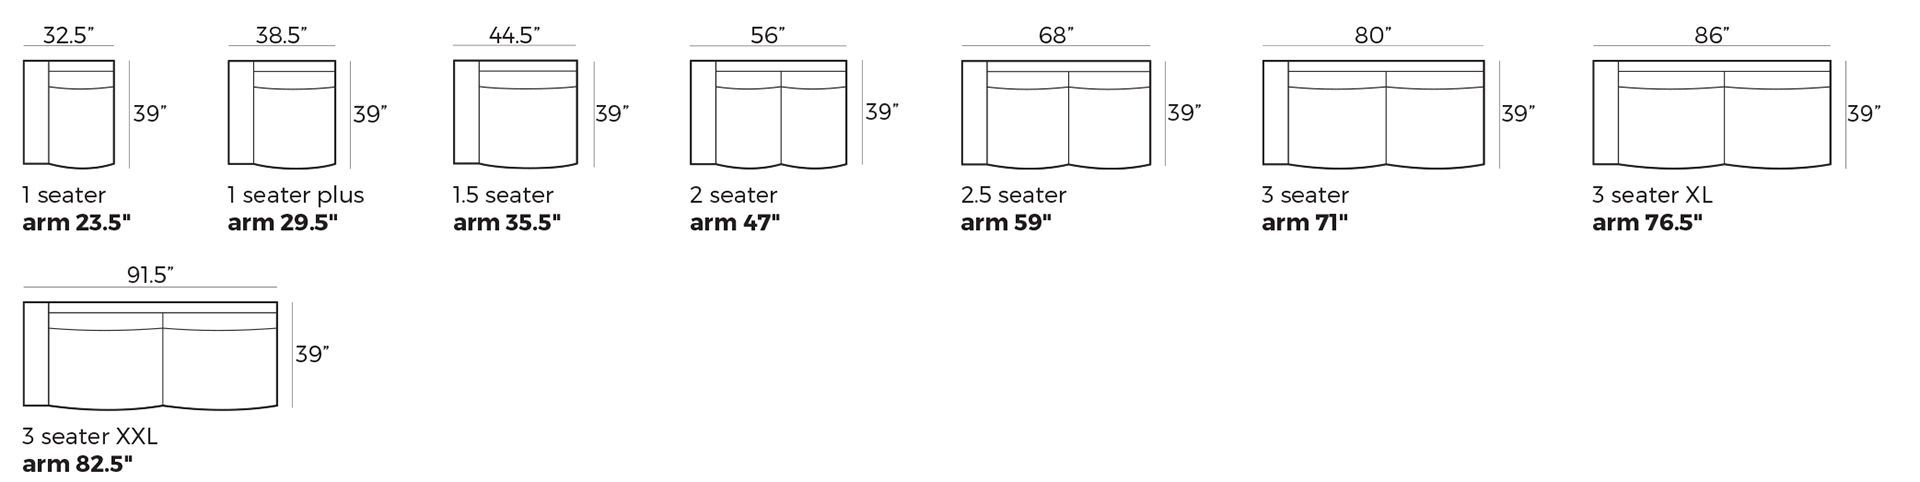 Modules with armrest